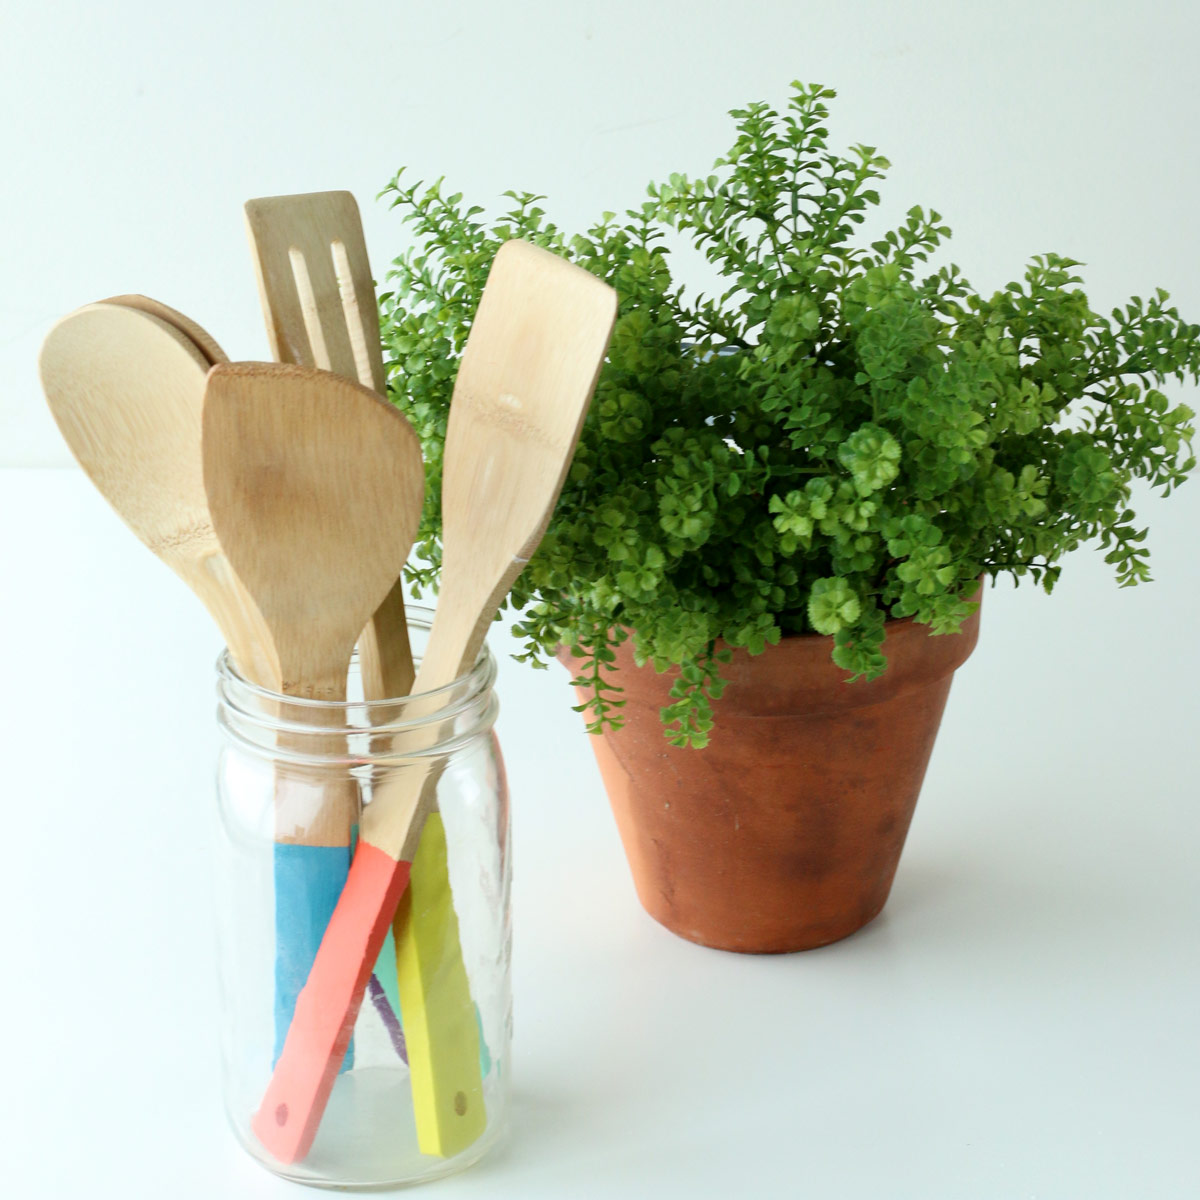 Bamboo Utensils for Mother's Day Gift Idea